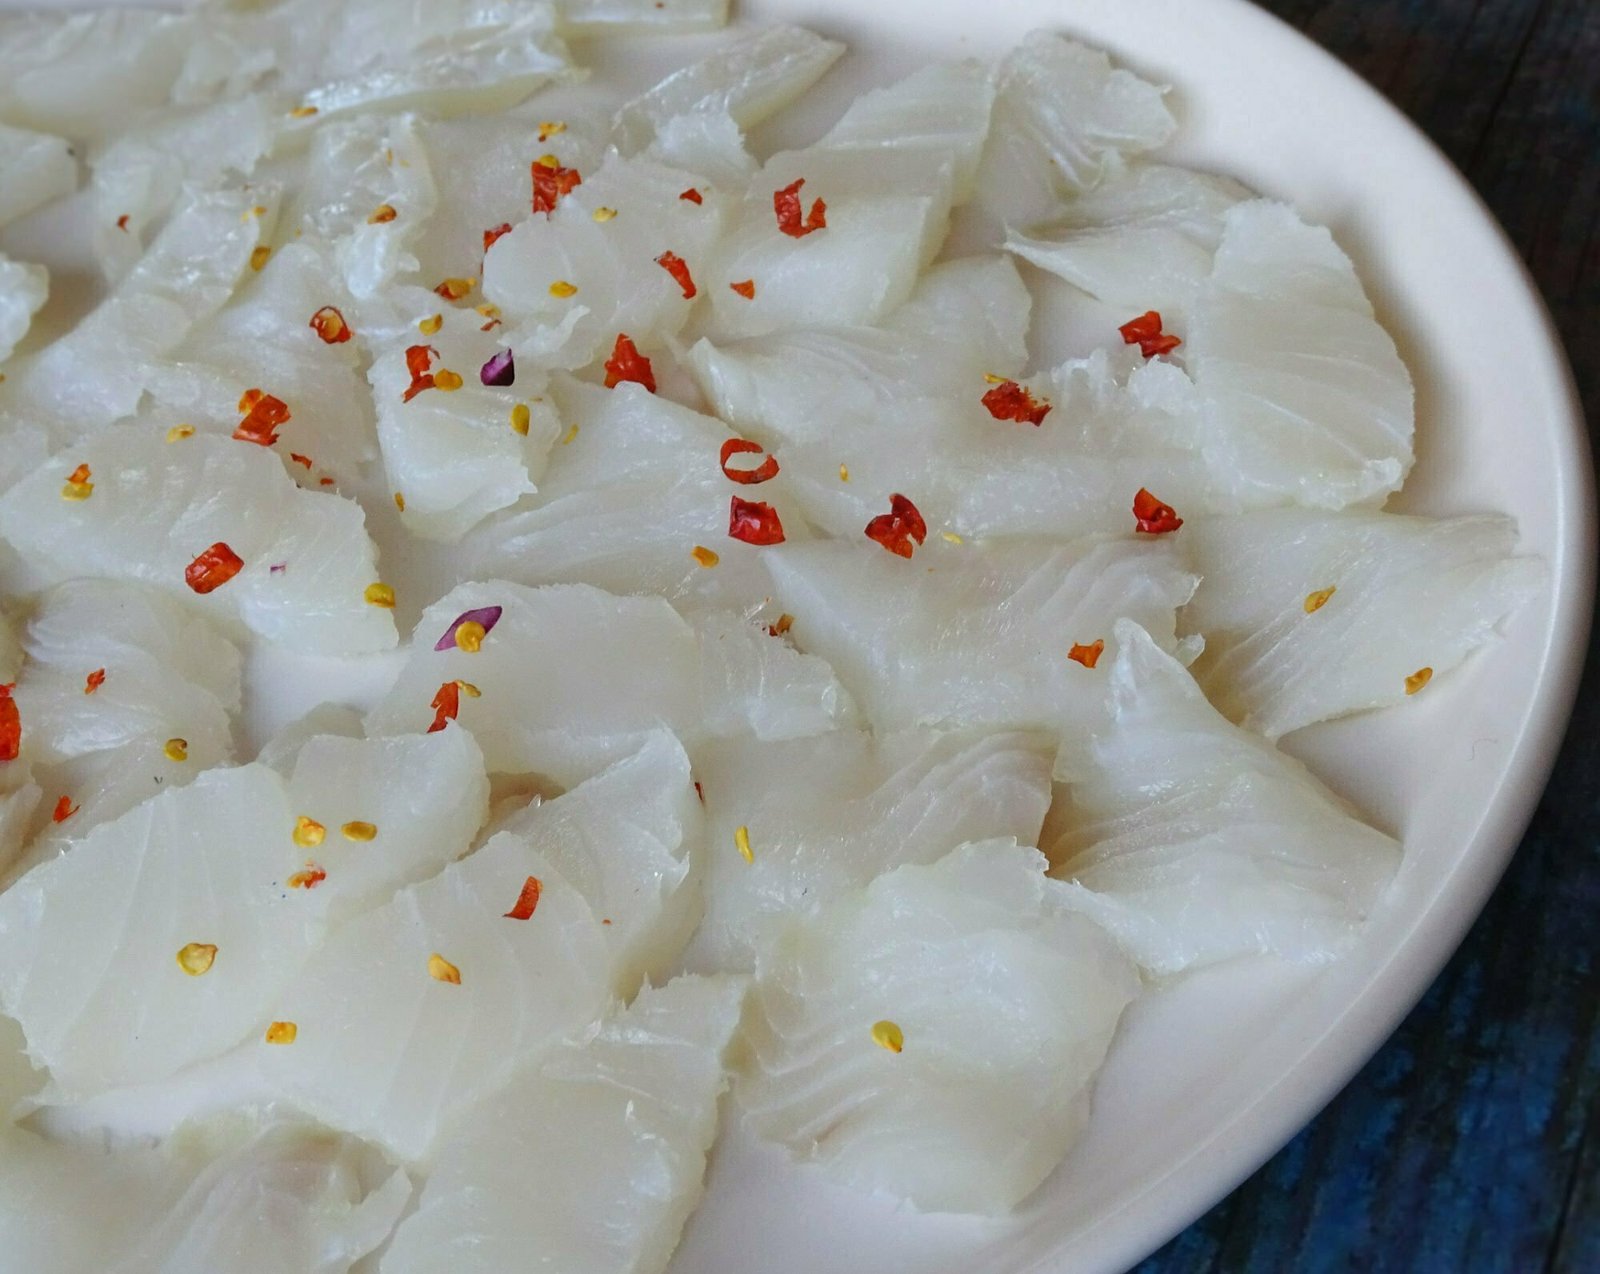 A large white plate sits on a black and blue background with fillets of white fish sprinkled with some sliced red chili 